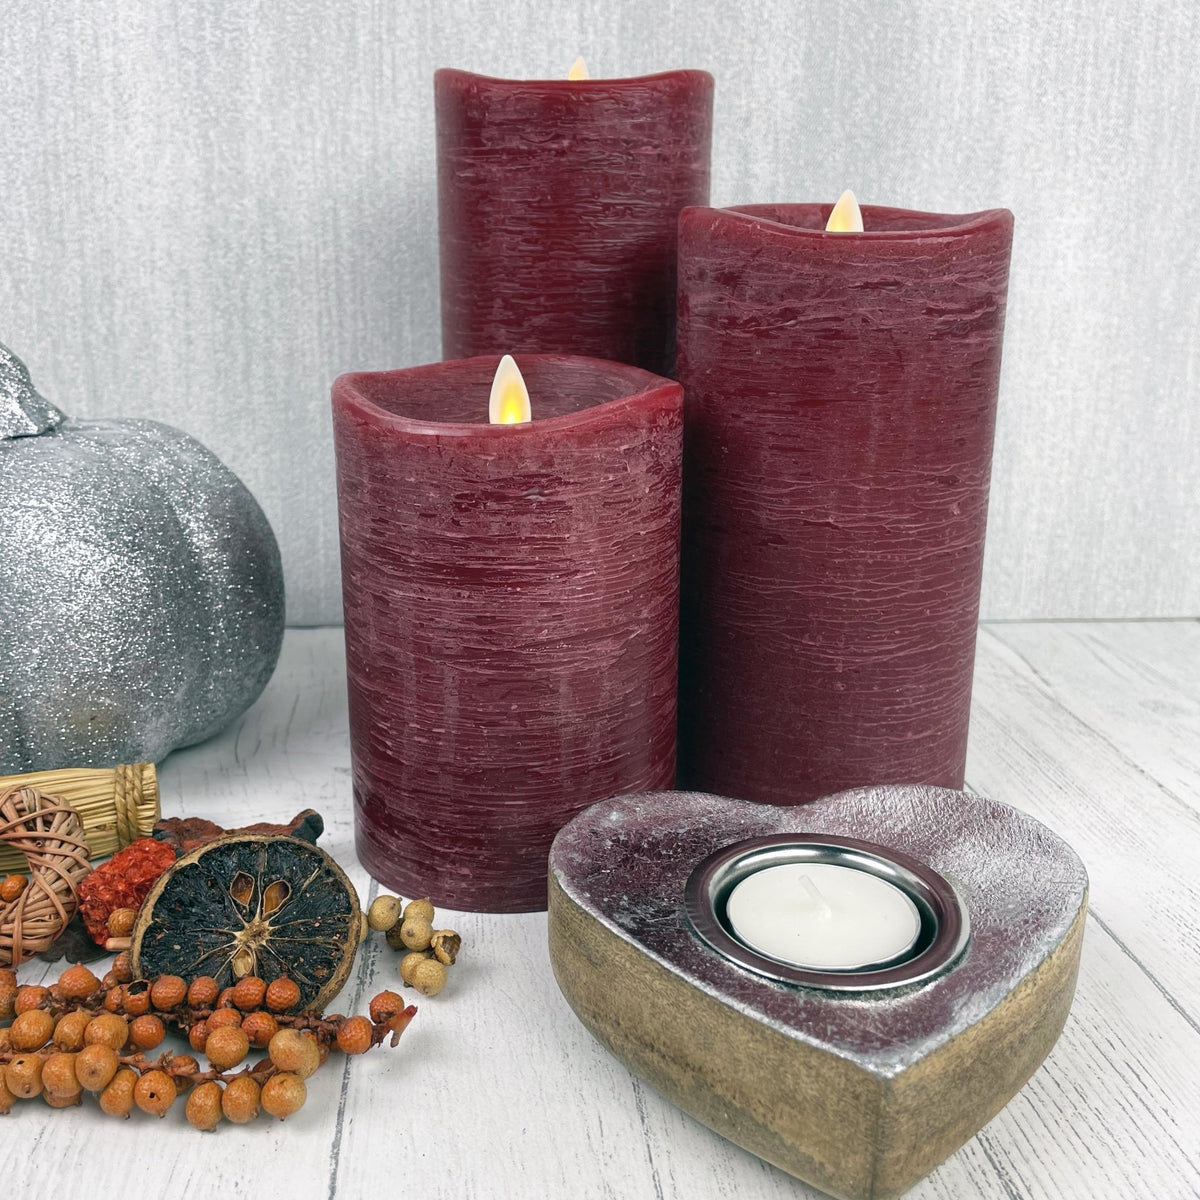 Red Luminara Flame Effect Battery candle set of 3, with autumn decor and a heart tealight holder